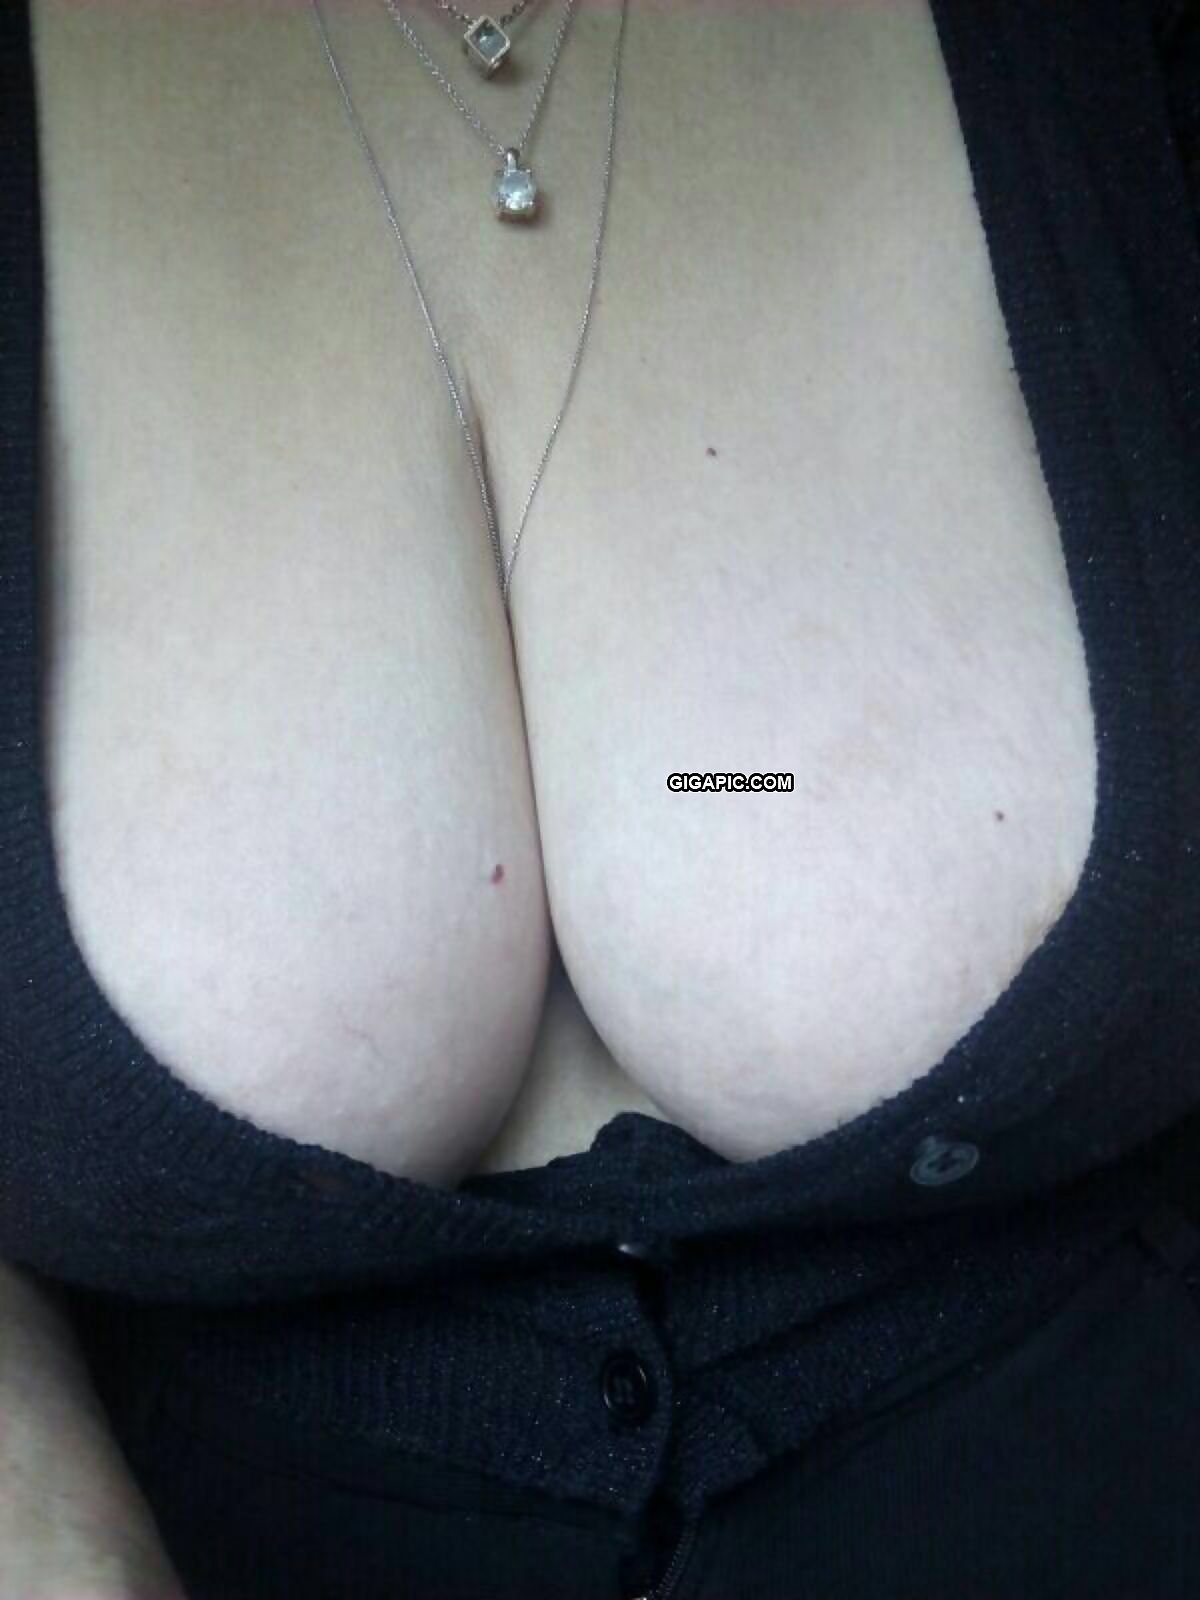 My 70 year old gf loves showing her tits